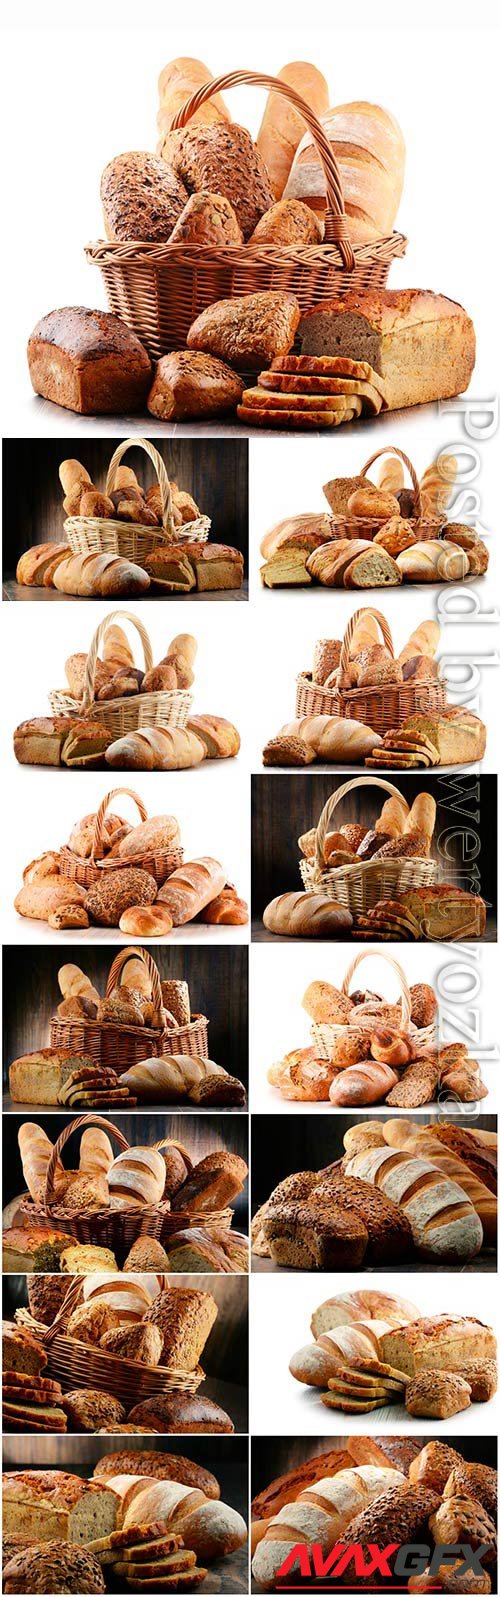 Baskets with freshly baked bread stock photo